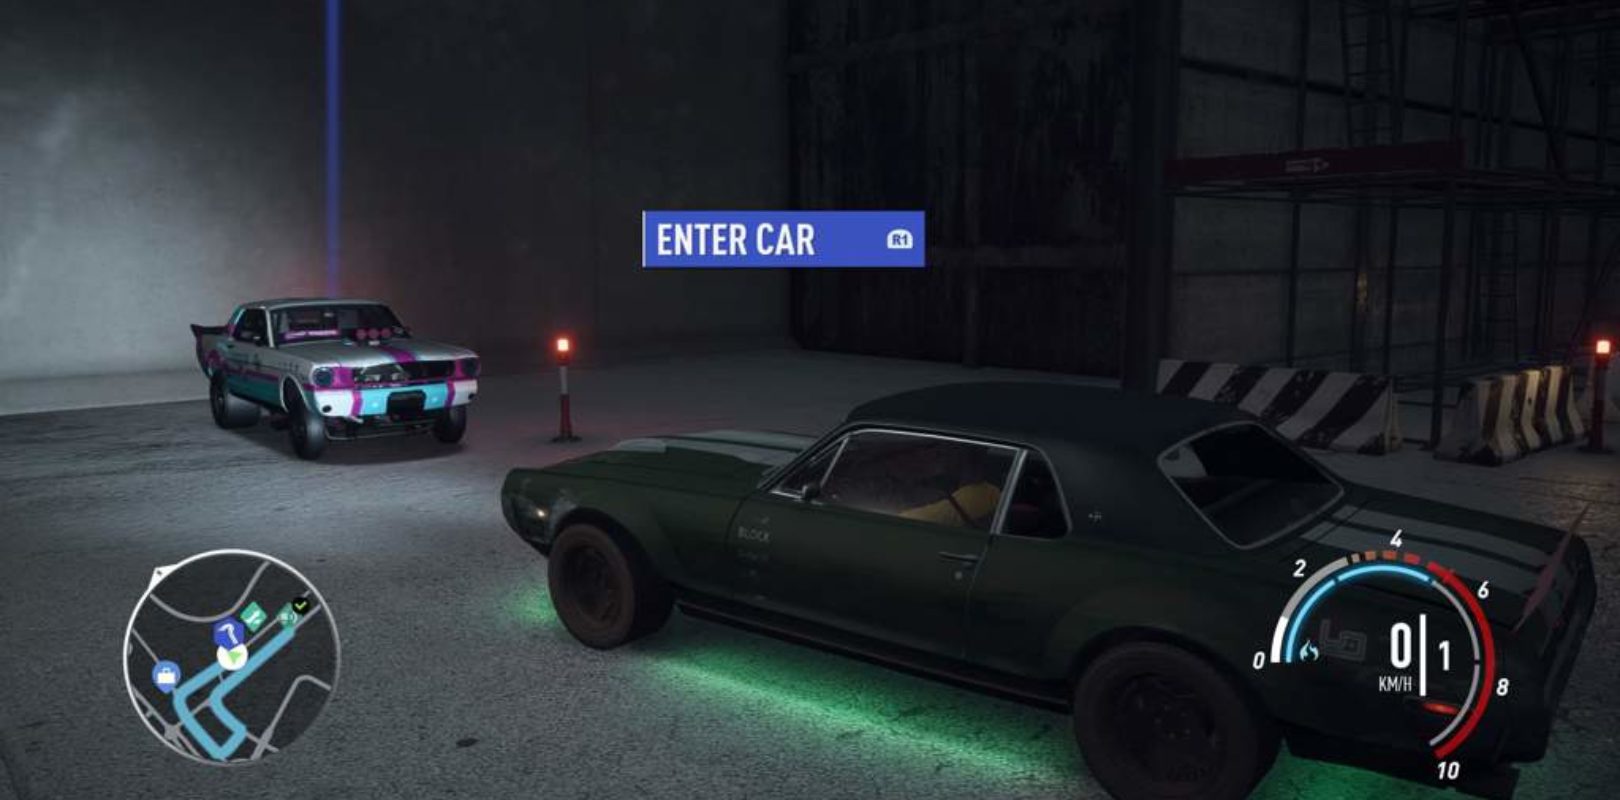 nfs payback fortune valley abandoned car location march 2019